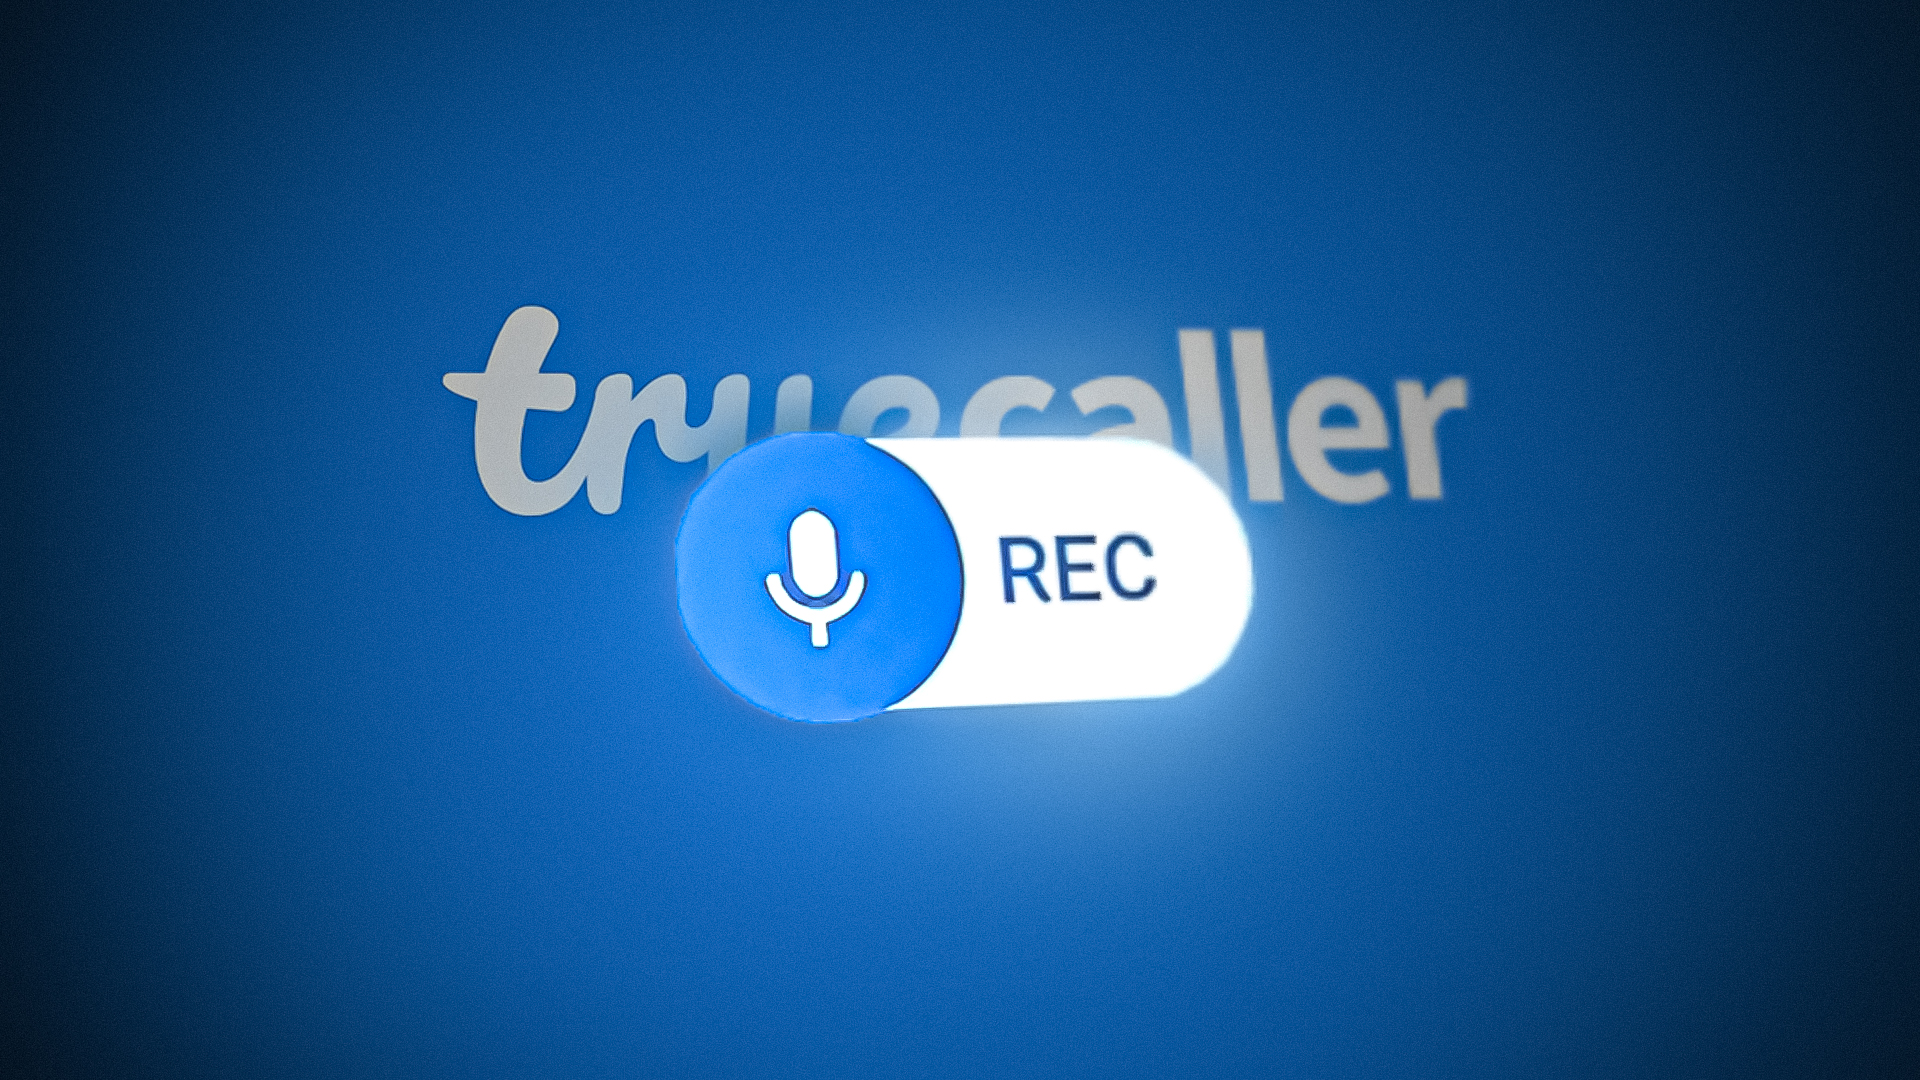 Black Truecaller Verified Business Caller ID, For home,hotel, USB at best  price in Bengaluru